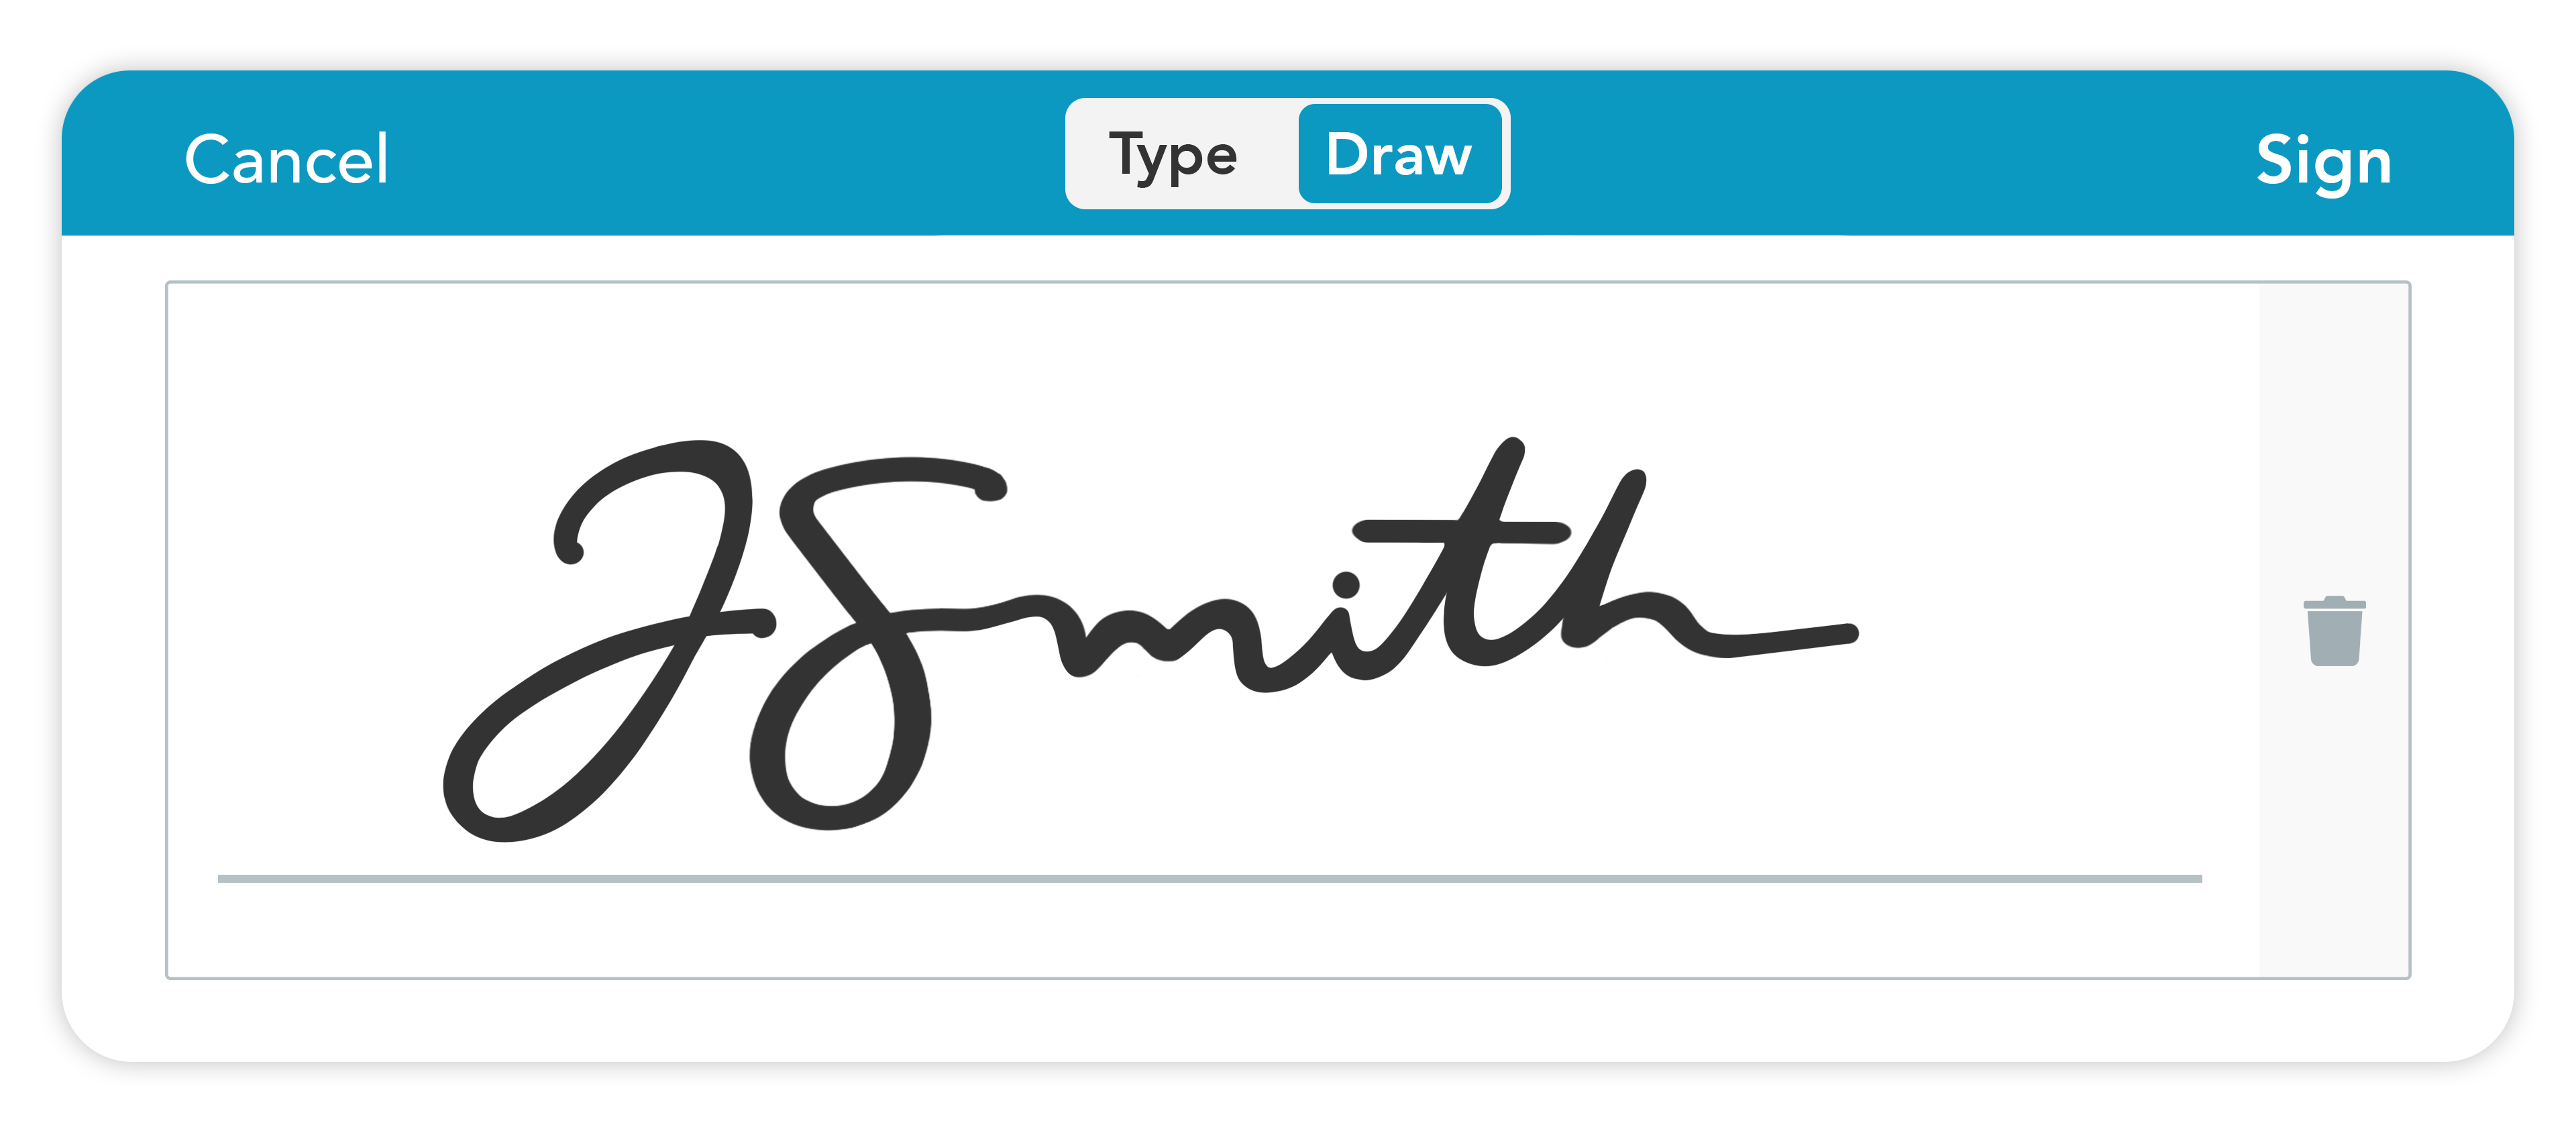 Add eSignatures to your digital forms at no additional cost.